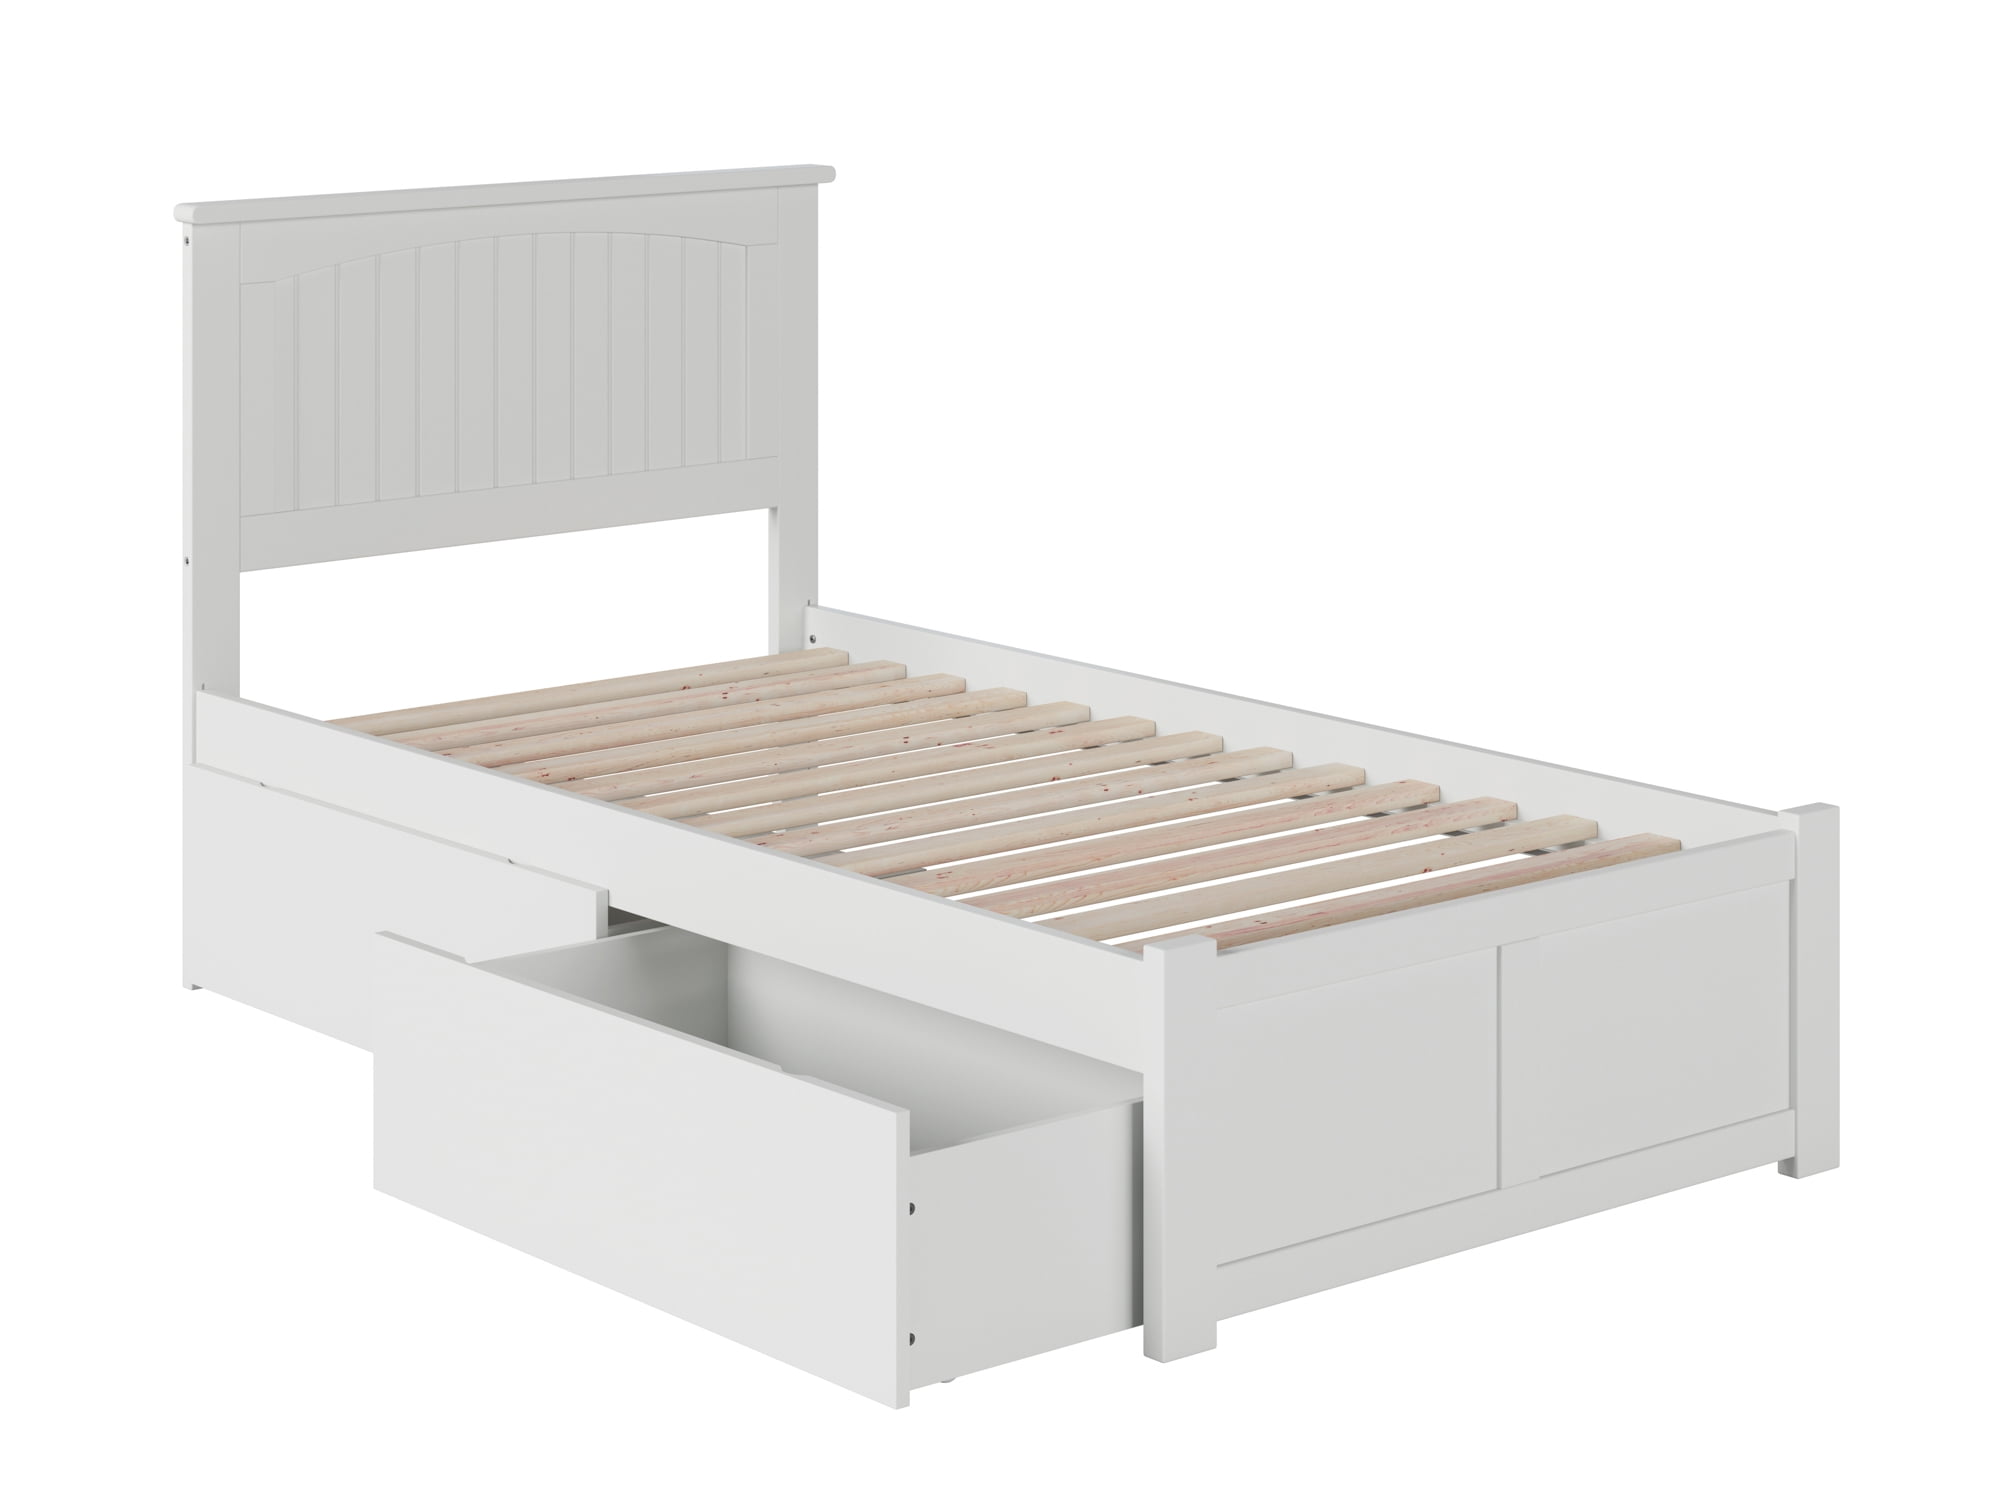 Picture of Atlantic Furniture AR8222112 Nantucket Panel Footboard & Urban Bed Drawers, White - Twin